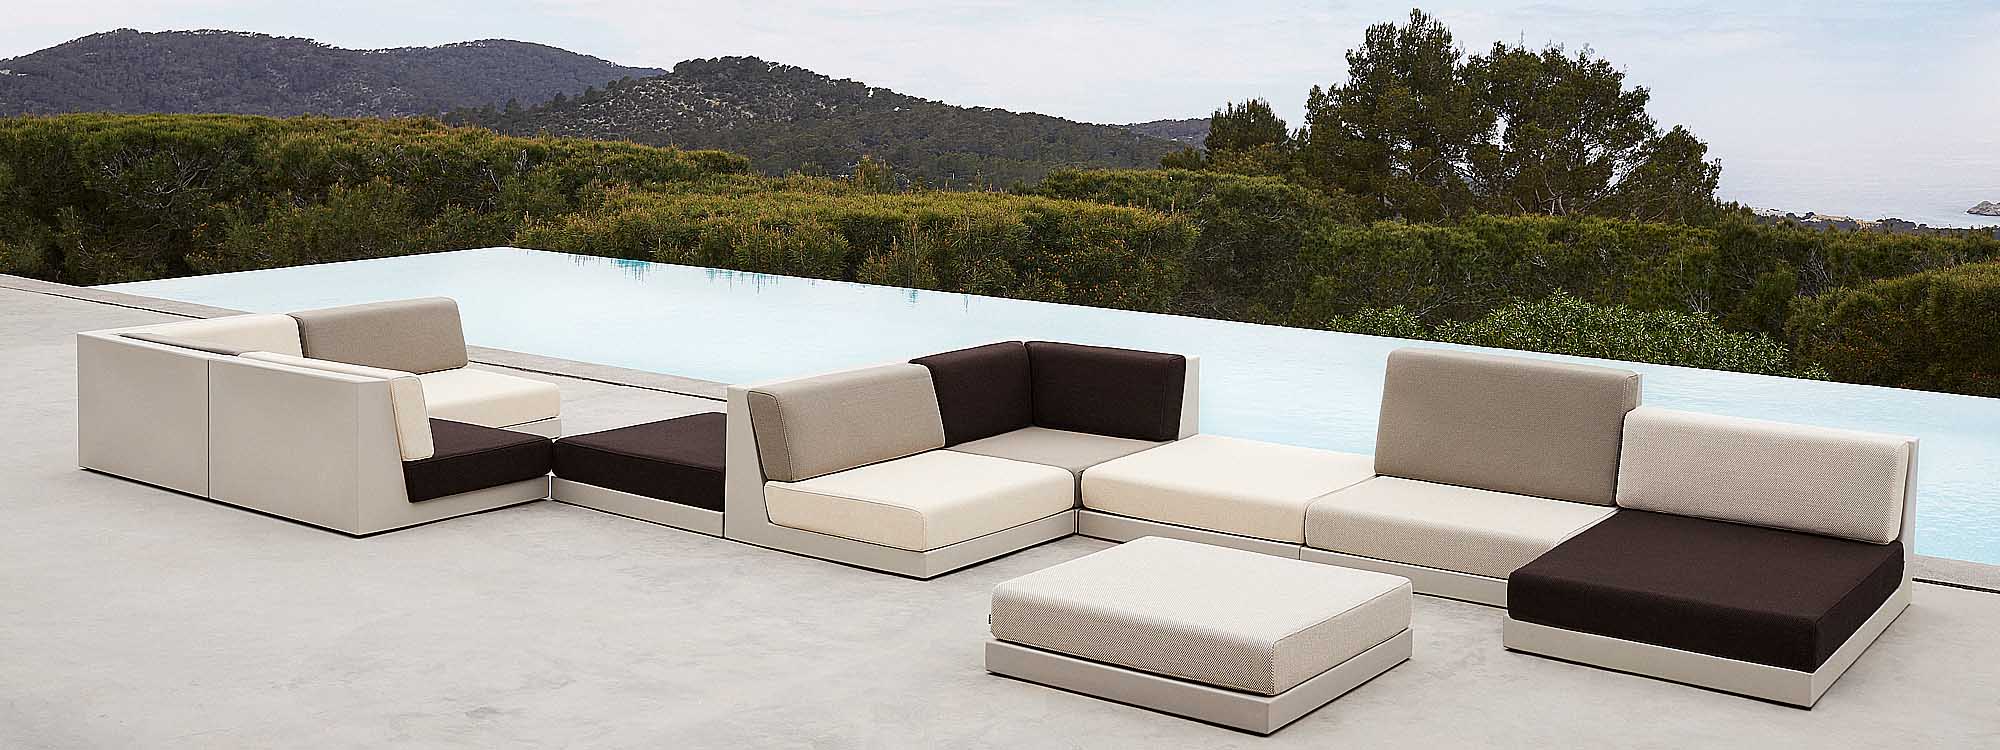 Image of Vondom Pixel taupe garden sofa with range of brown cushions